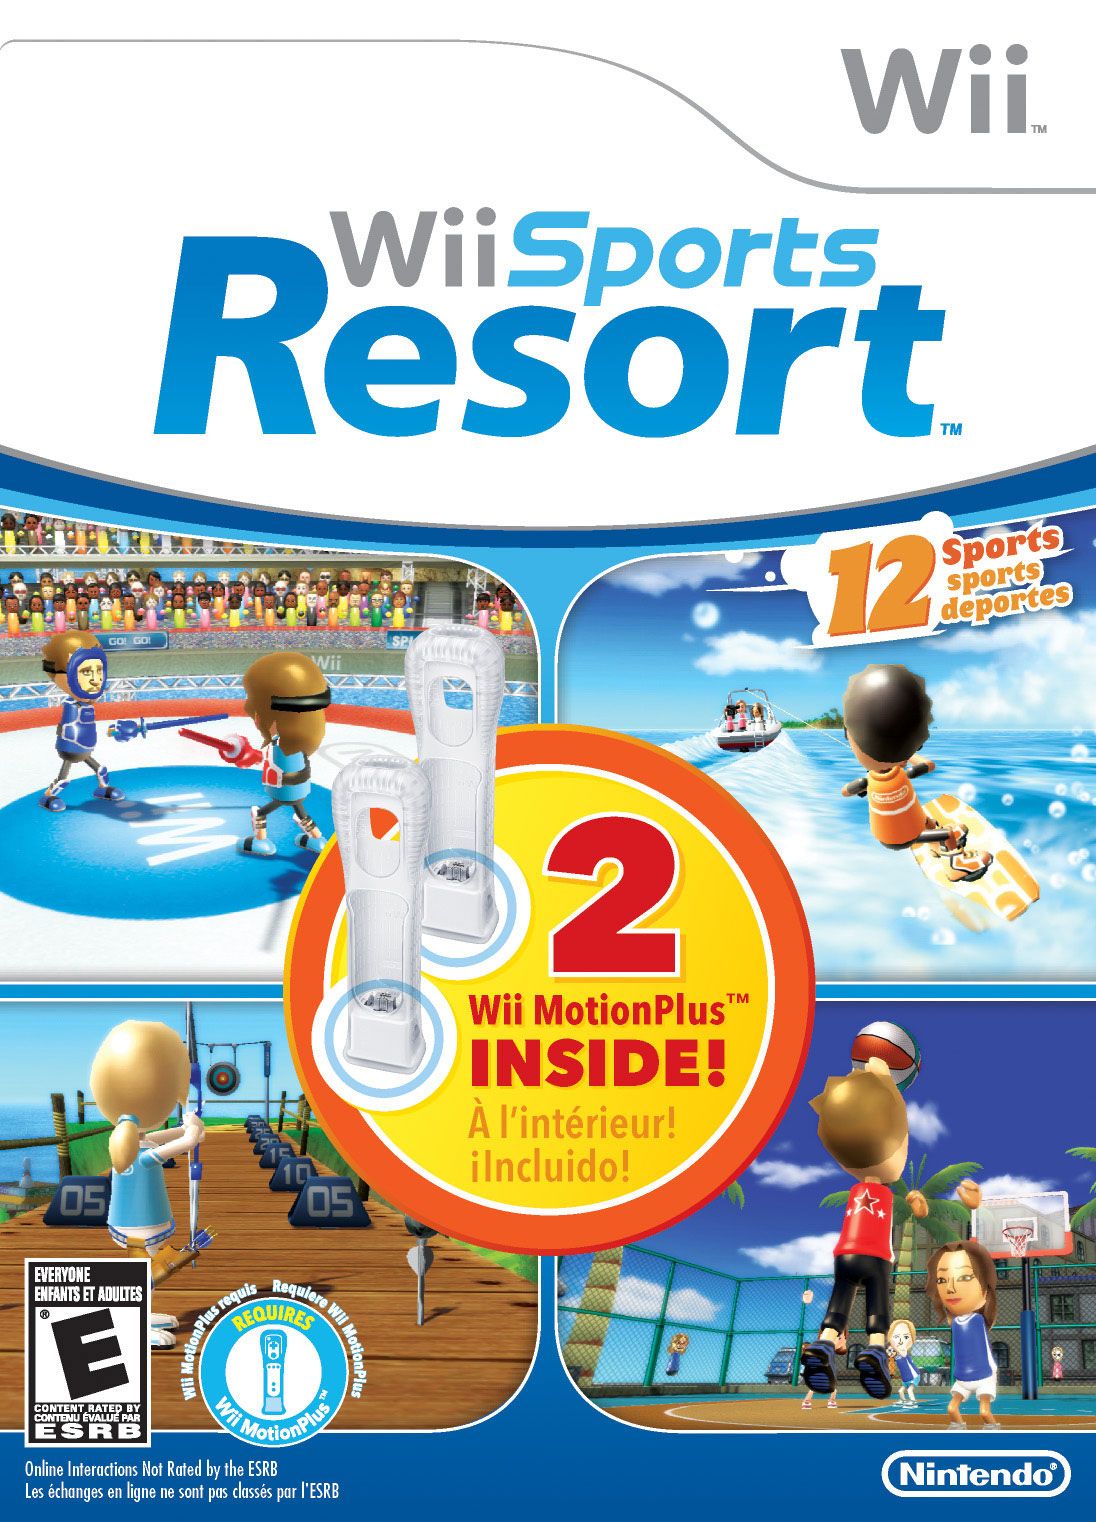 Wii Sports Resort screenshots, image and picture